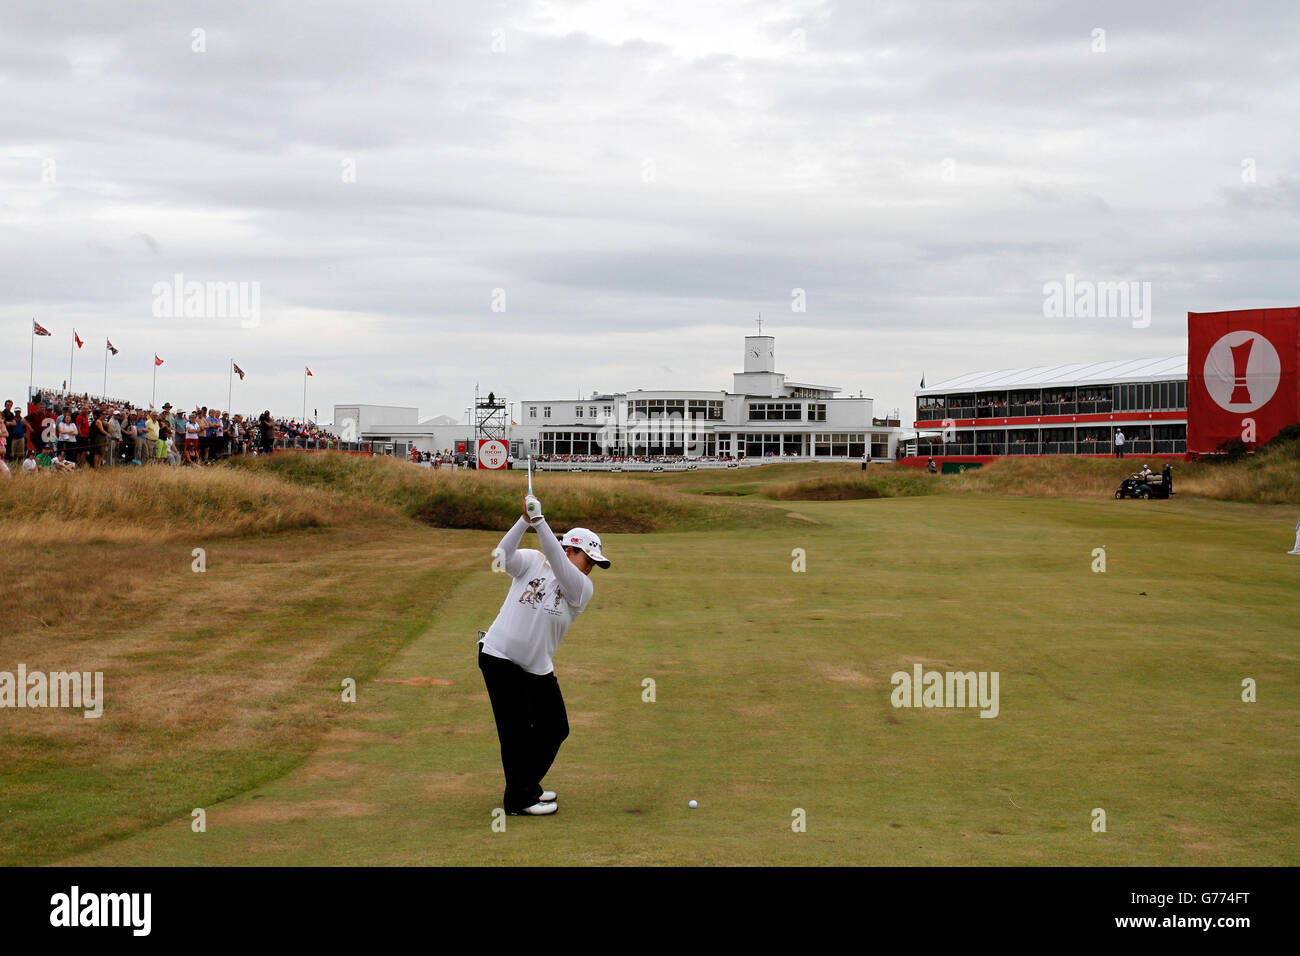 Sun-Ju Ahn of Korea plays approach shot to 18th during day three of the Ricoh Women's British Open at Royal Birkdale, Southport. Stock Photo